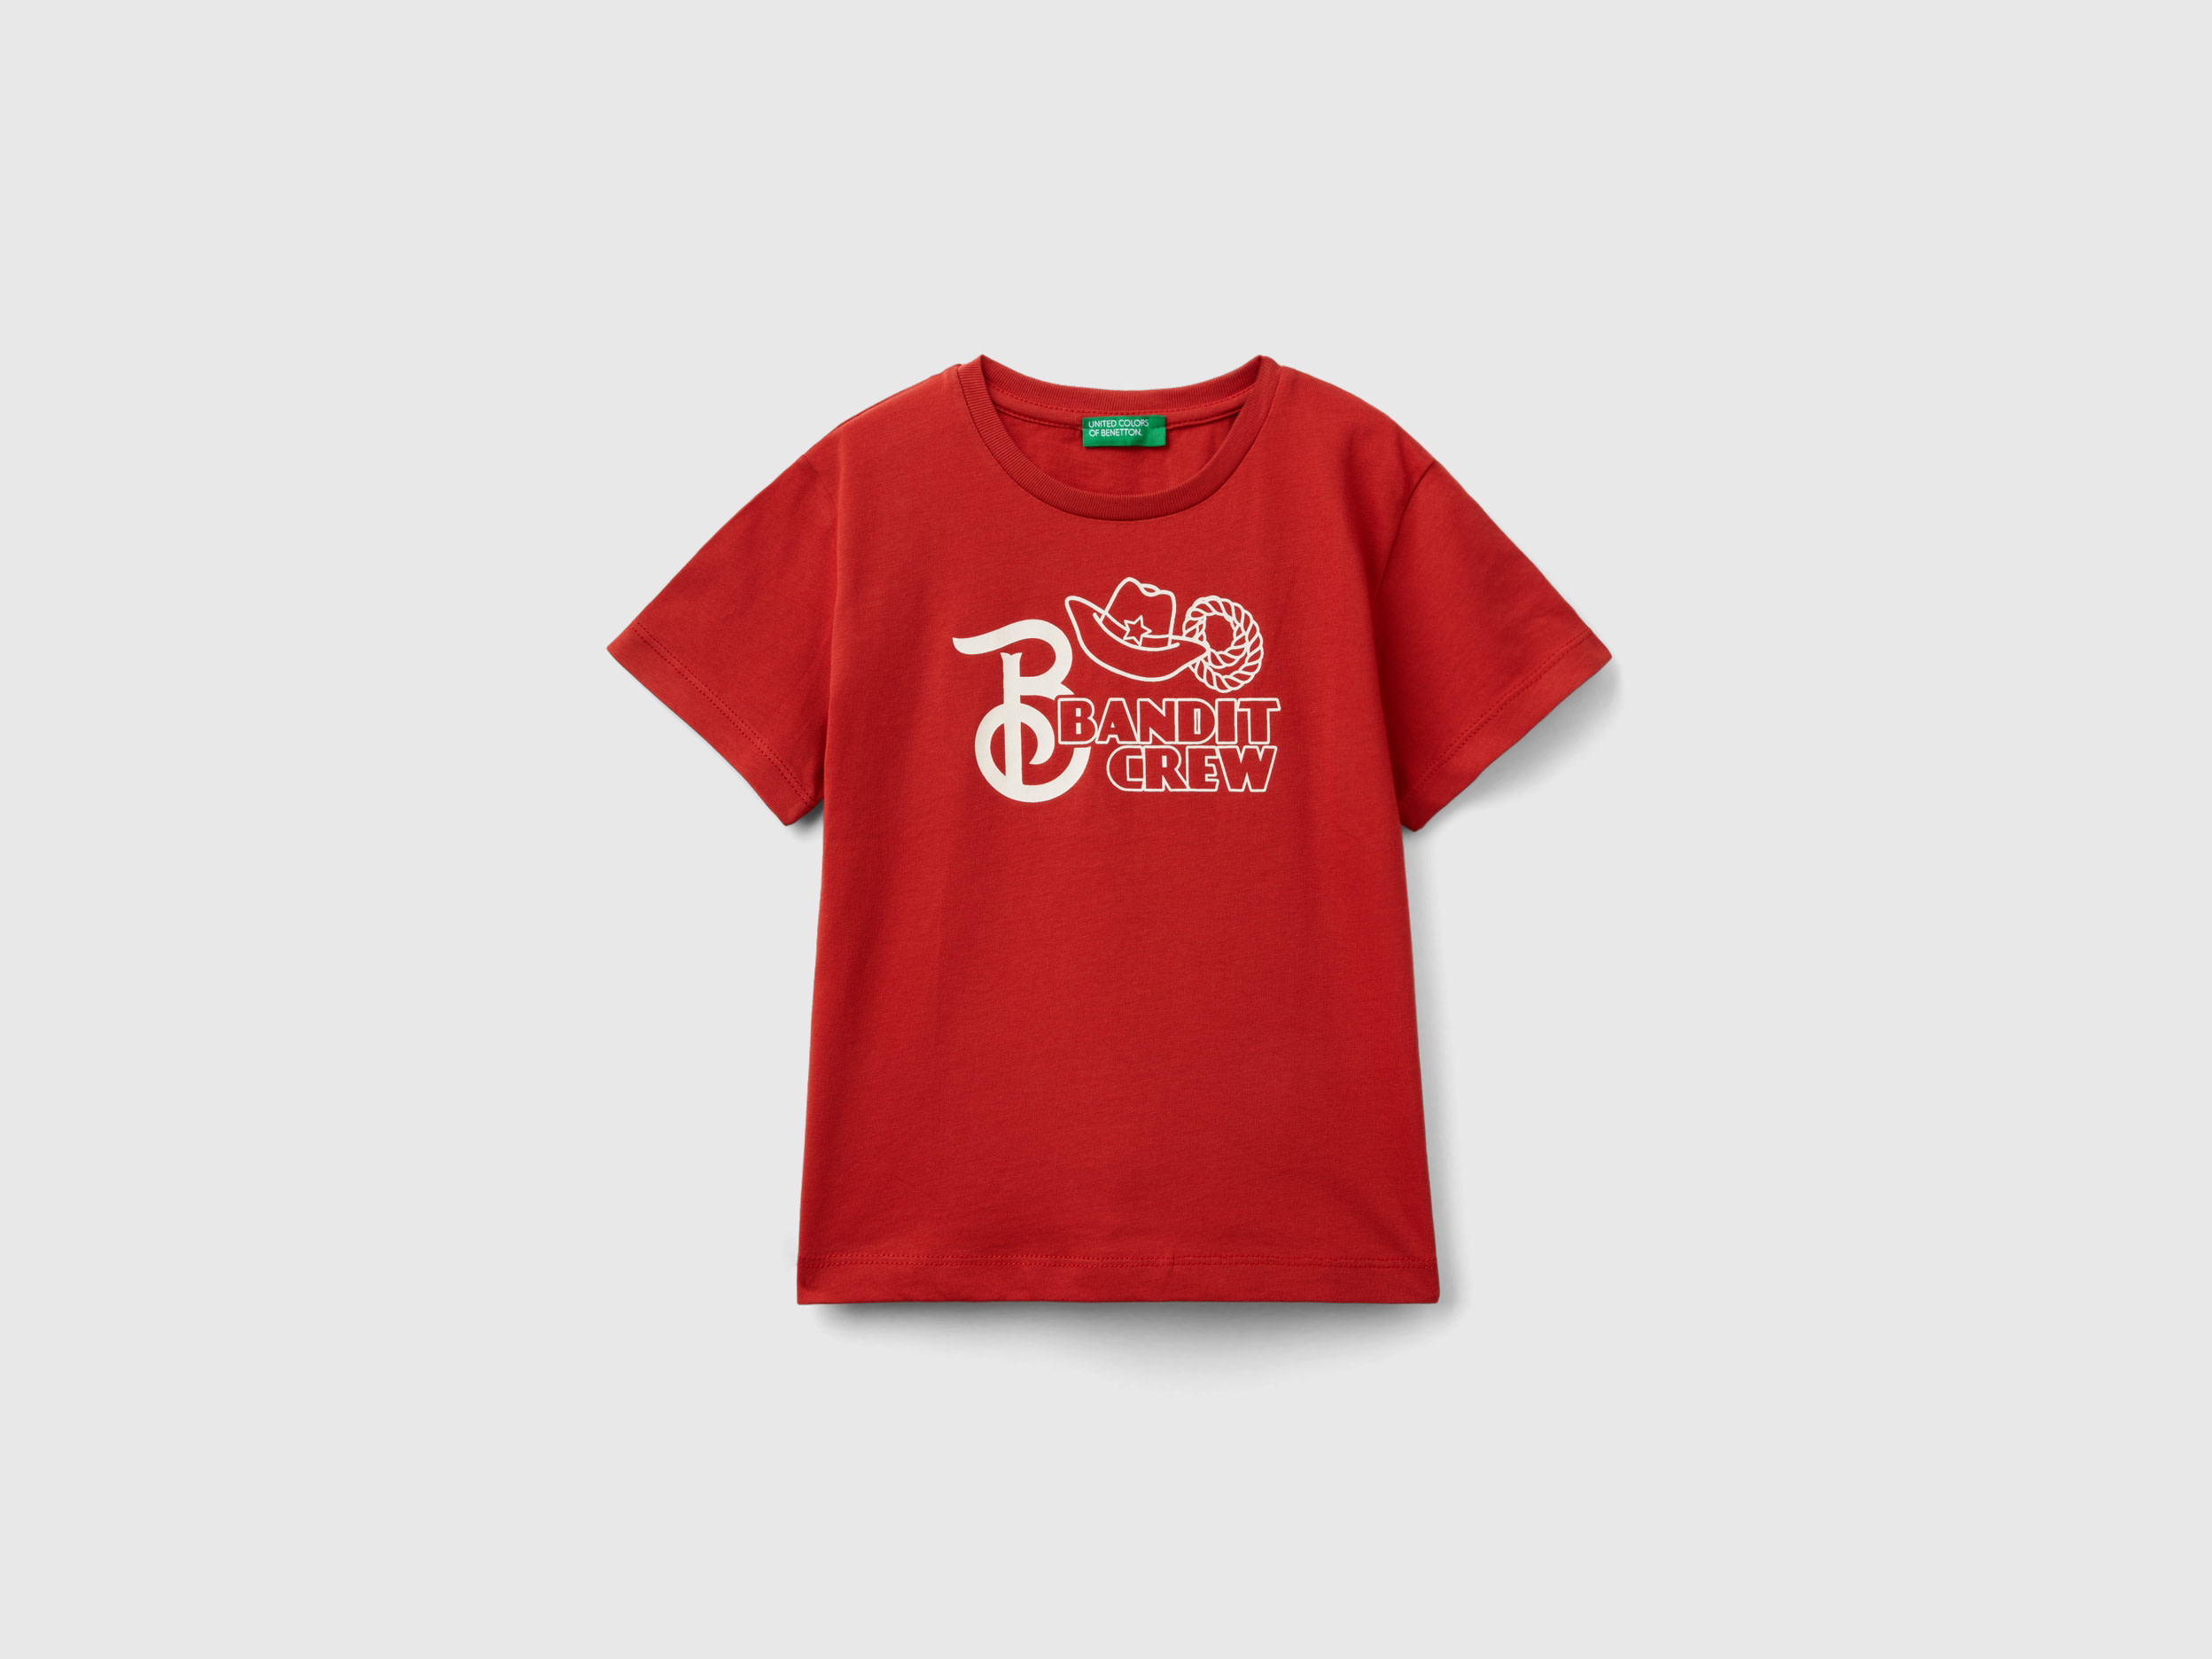 Benetton, T-shirt In Organic Cotton With Print, size 5-6, Red, Kids